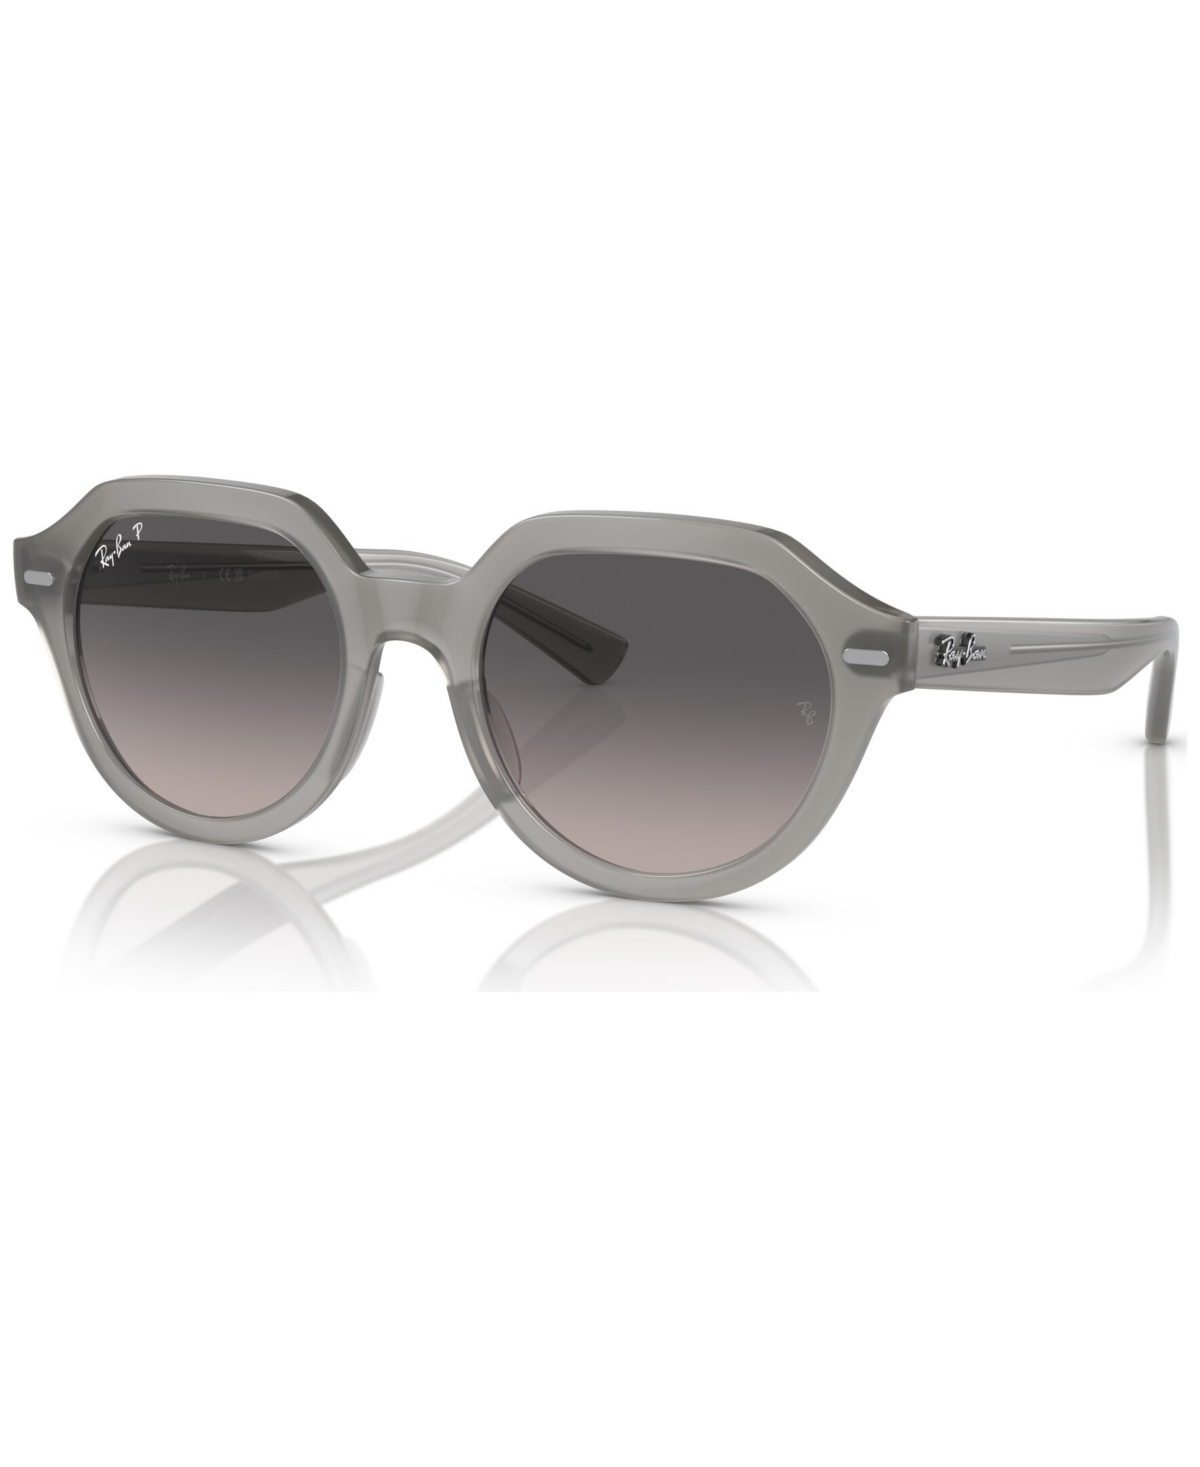 Ray Ban Unisex Polarized Sunglasses, Rb4399 Gina In Opal Gray